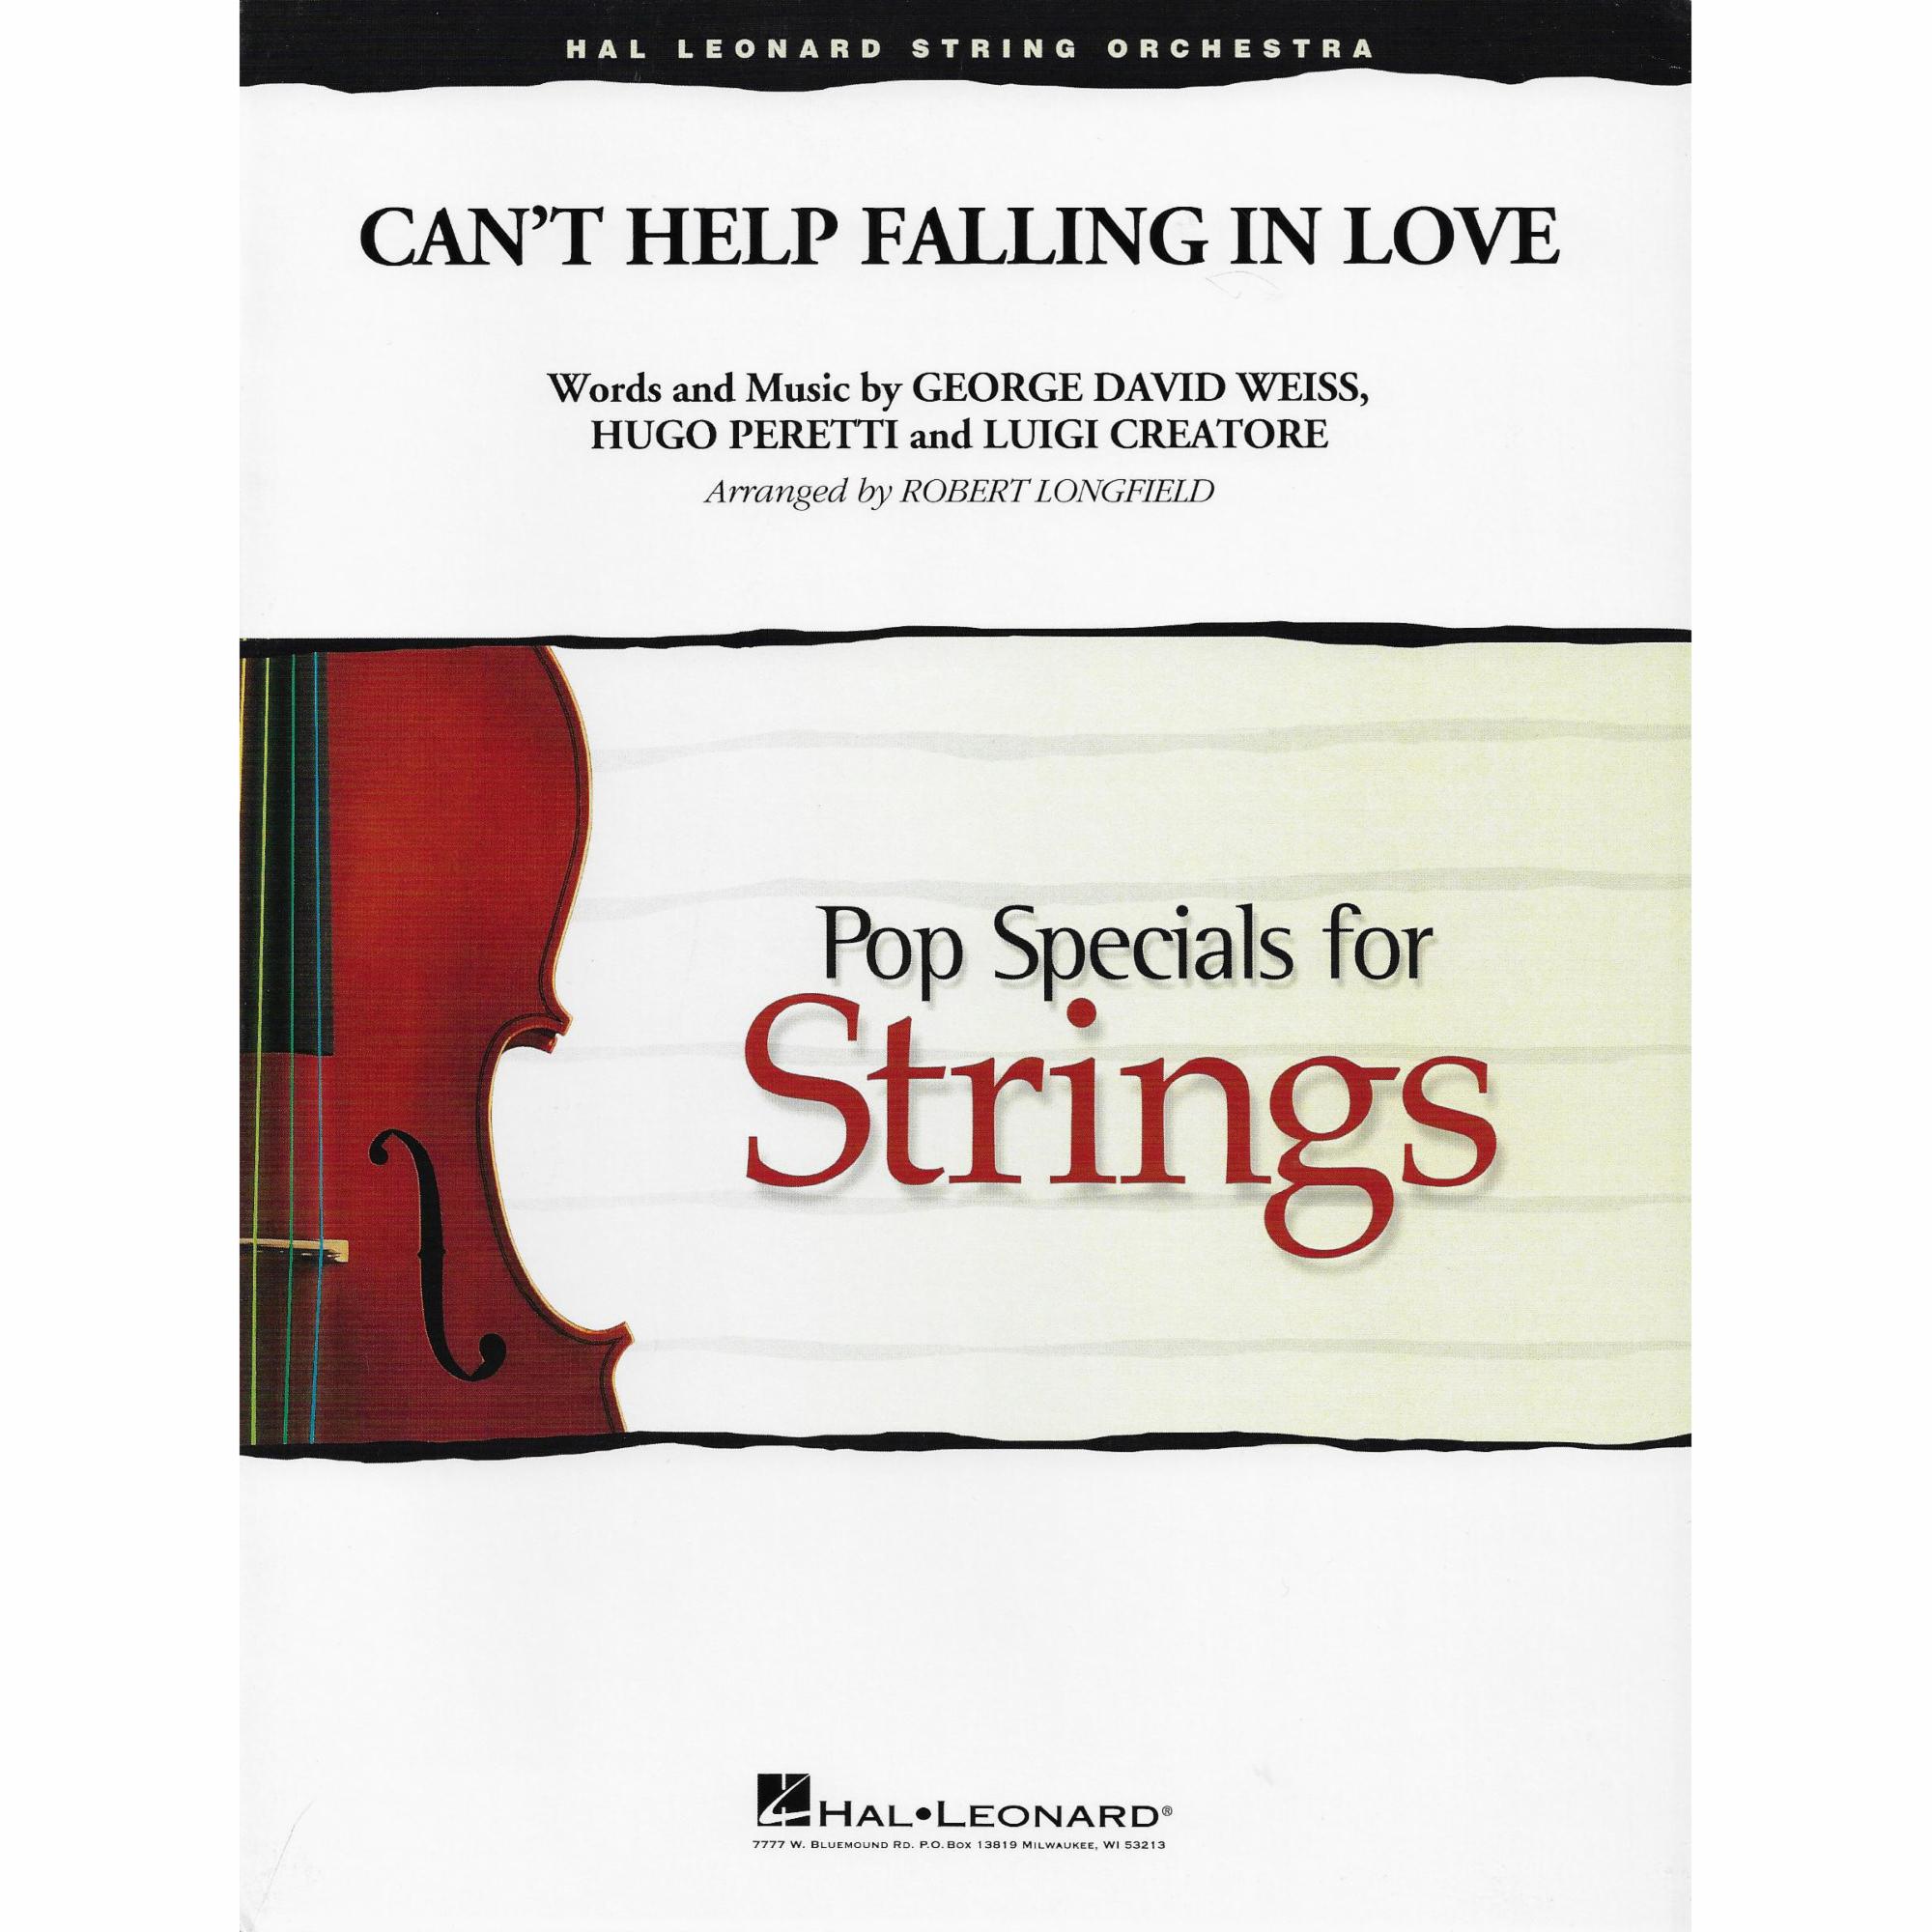 Can't Help Falling In Love for String Orchestra